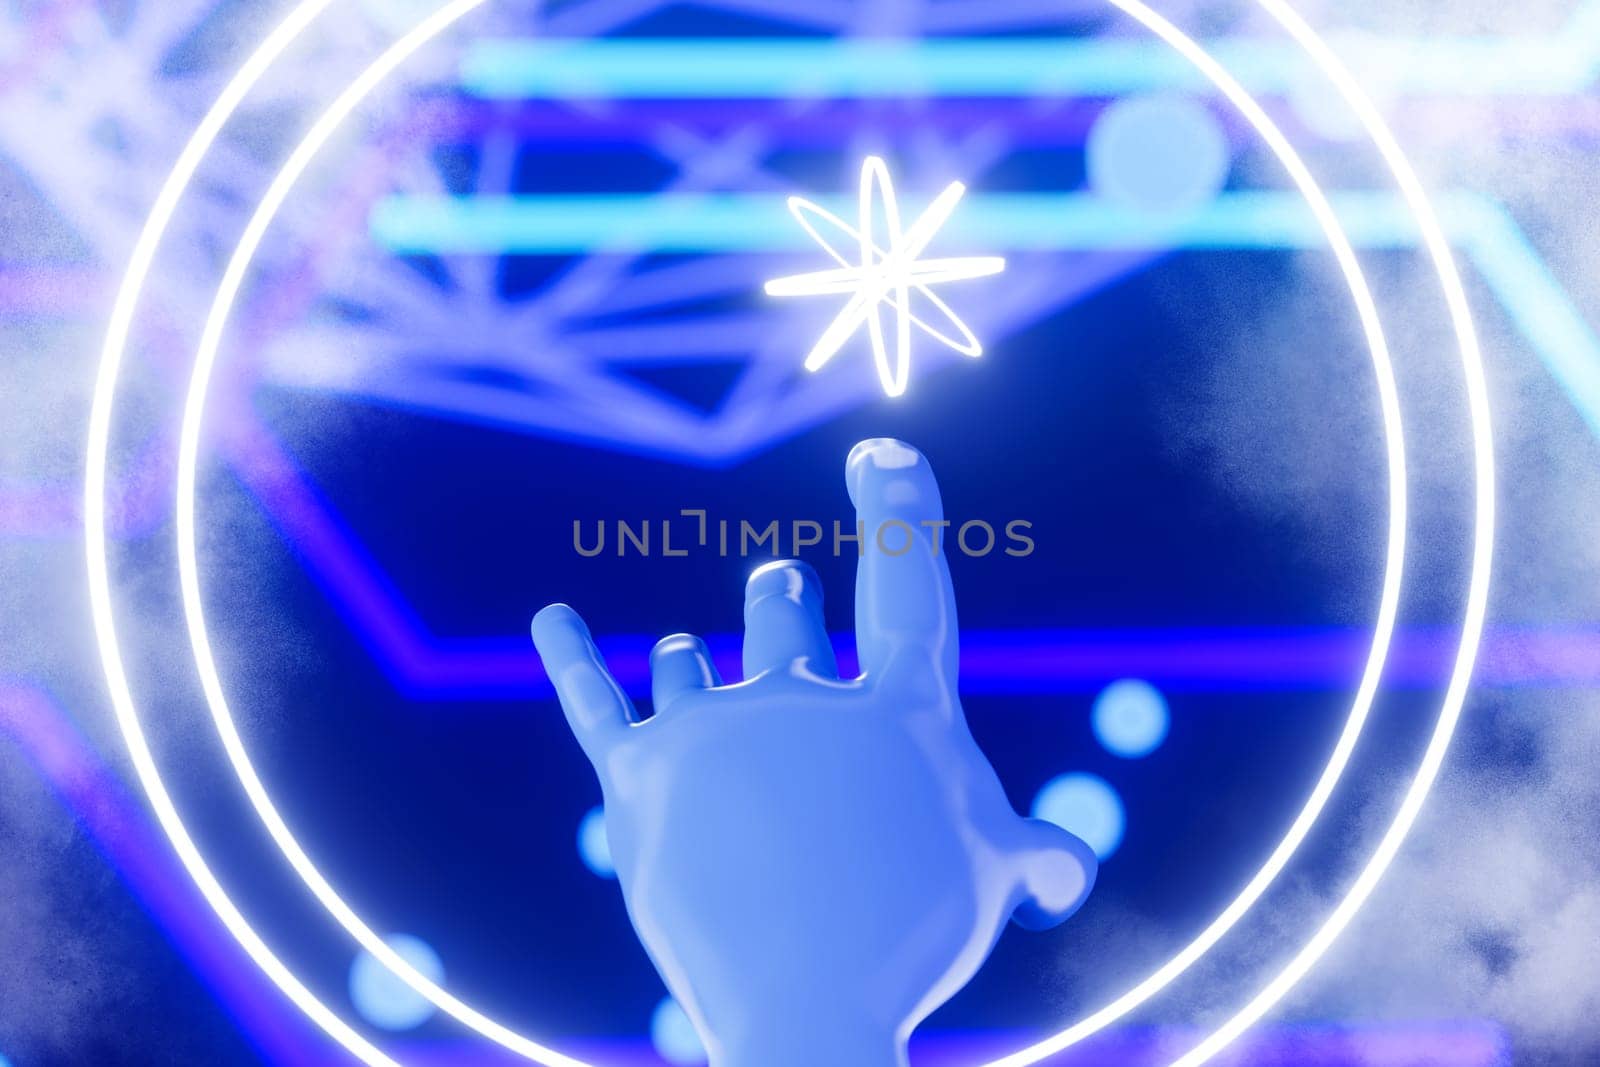 View of a Cyborg robot hand on a city glowing background 3d rendering for Artificial intelligence background concept.